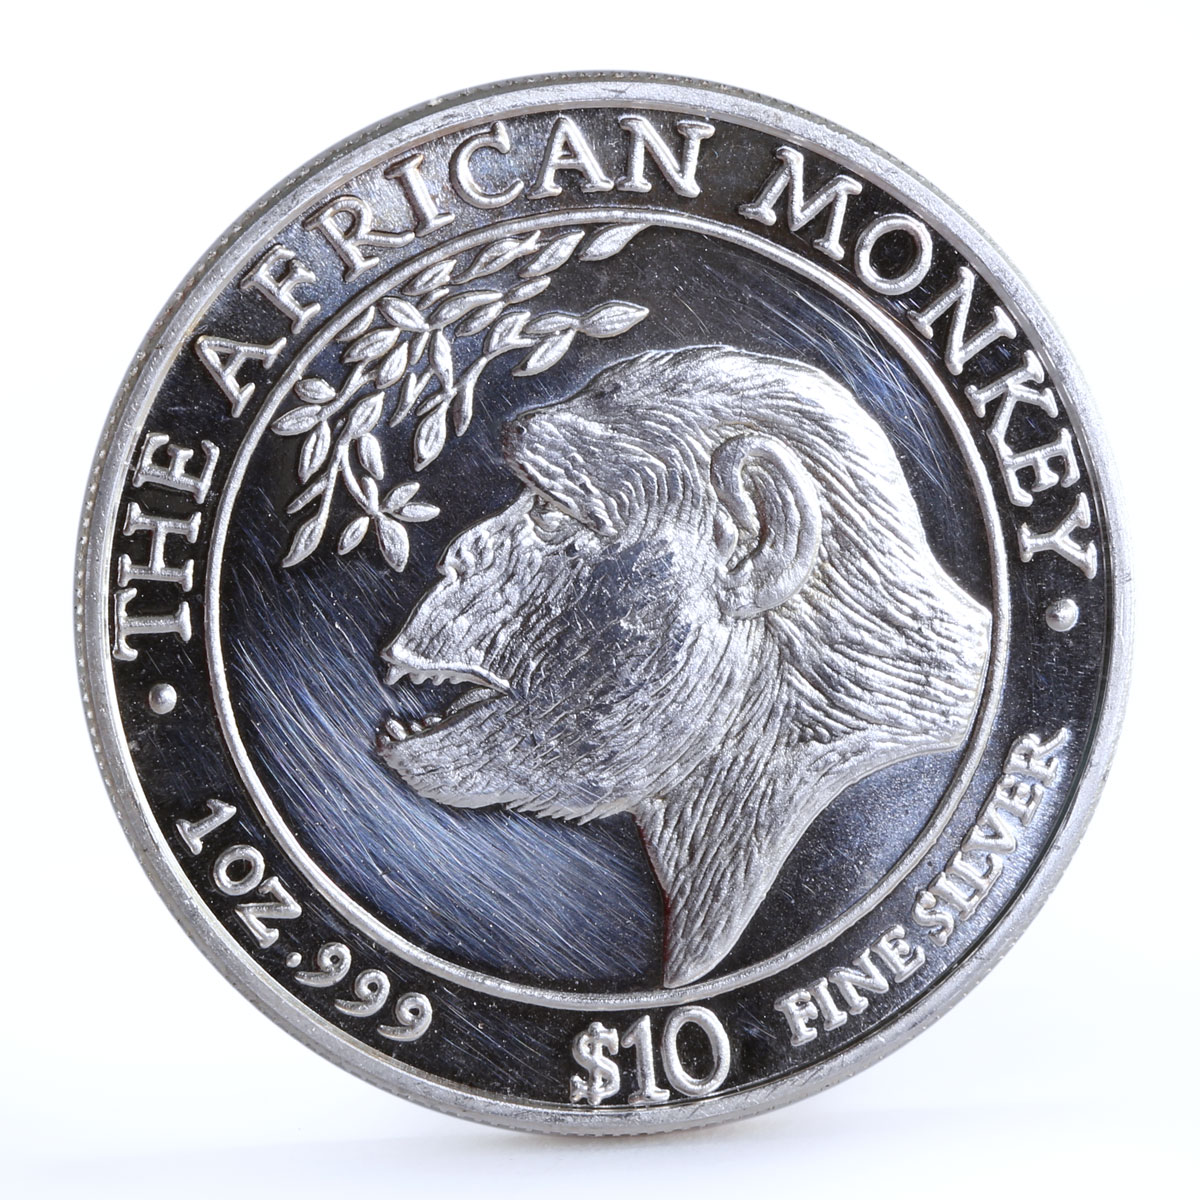 Somali 10 dollars The African Monkey Chimpanzee Fauna proof silver coin 2000